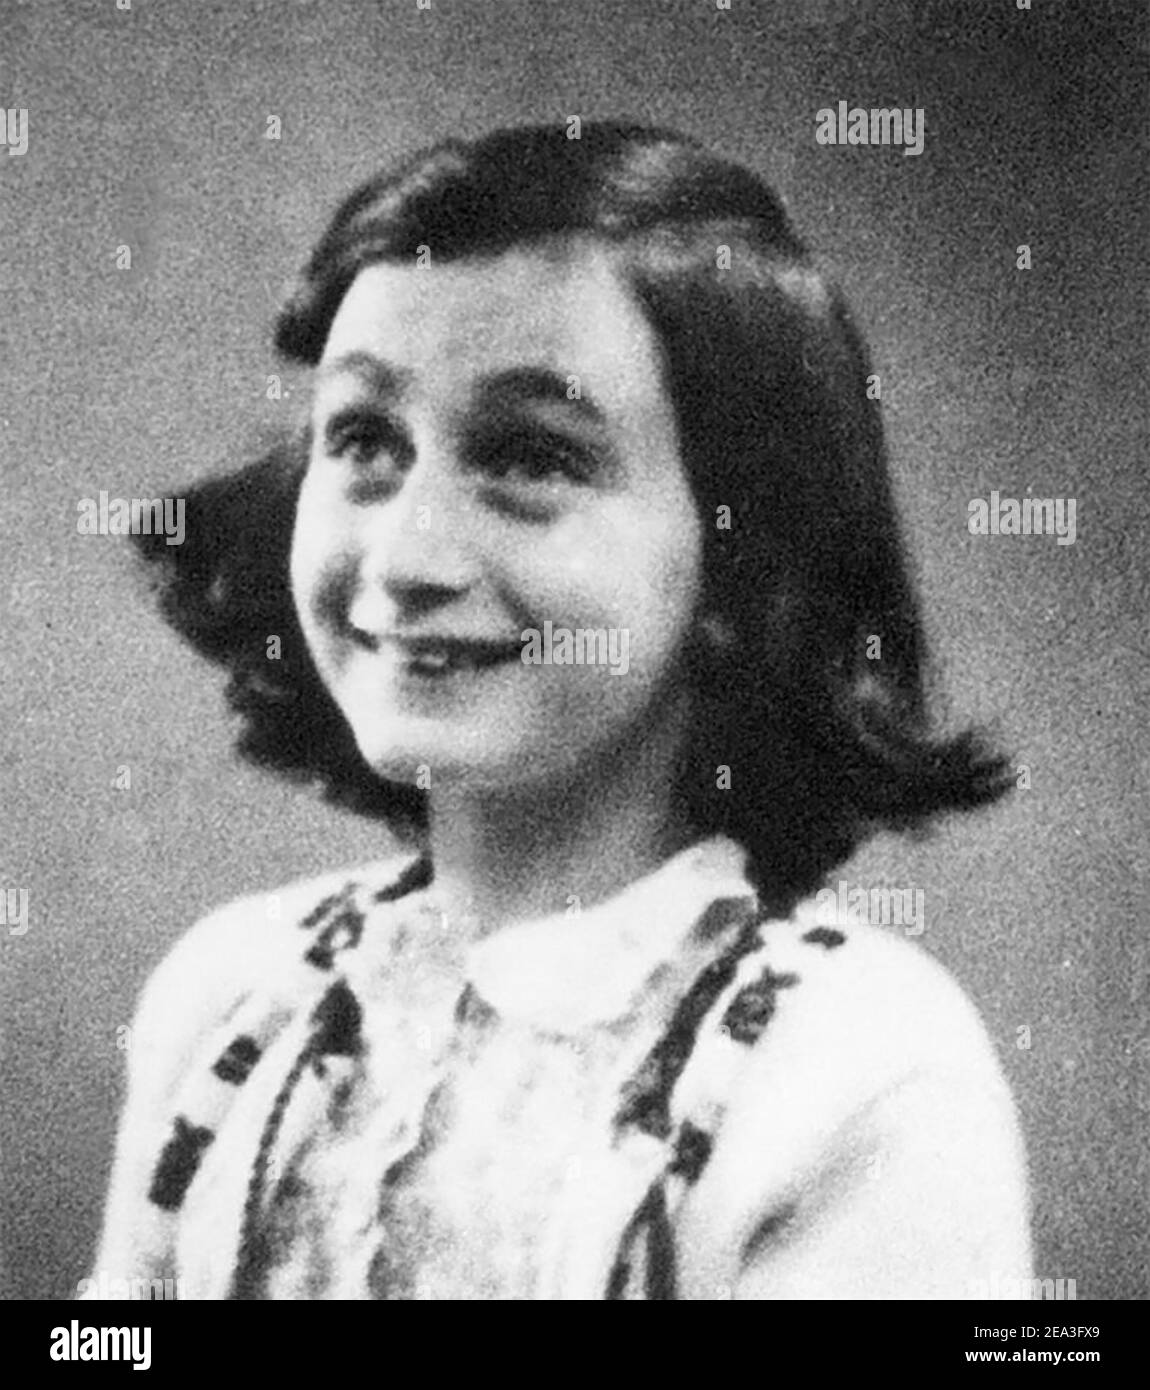 ANNE FRANK (1929-1945) German-Dutch diarist and  Holocaust victim, photographed in 1942 Stock Photo